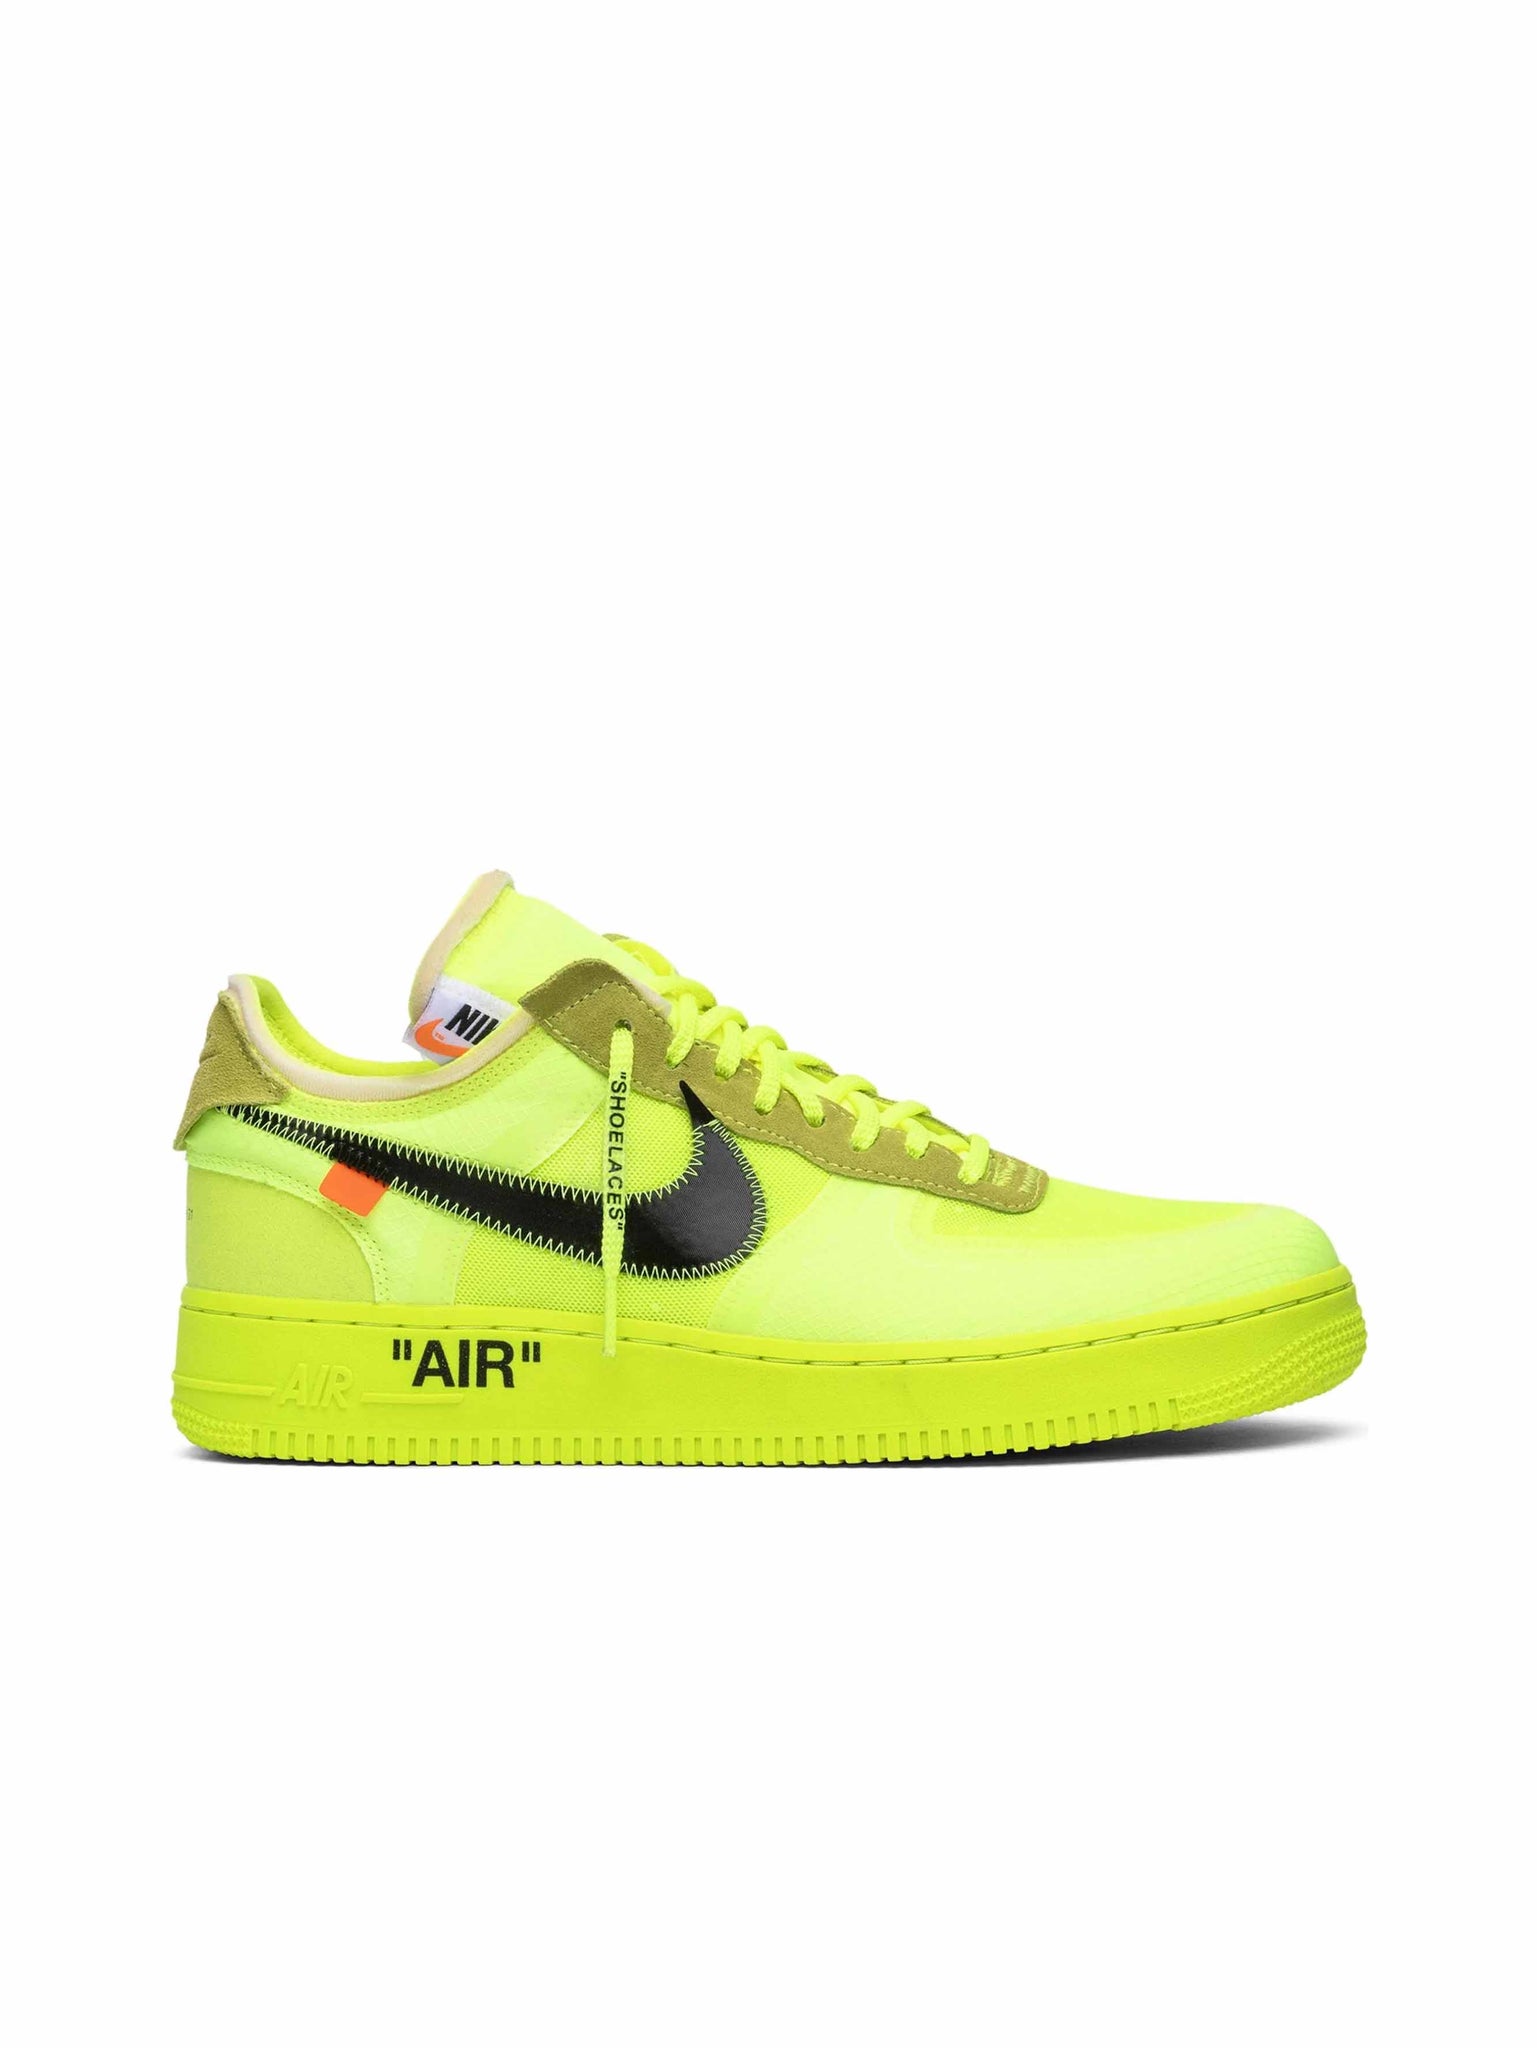 Nike Air Force 1 Low Off-White Volt - Prior